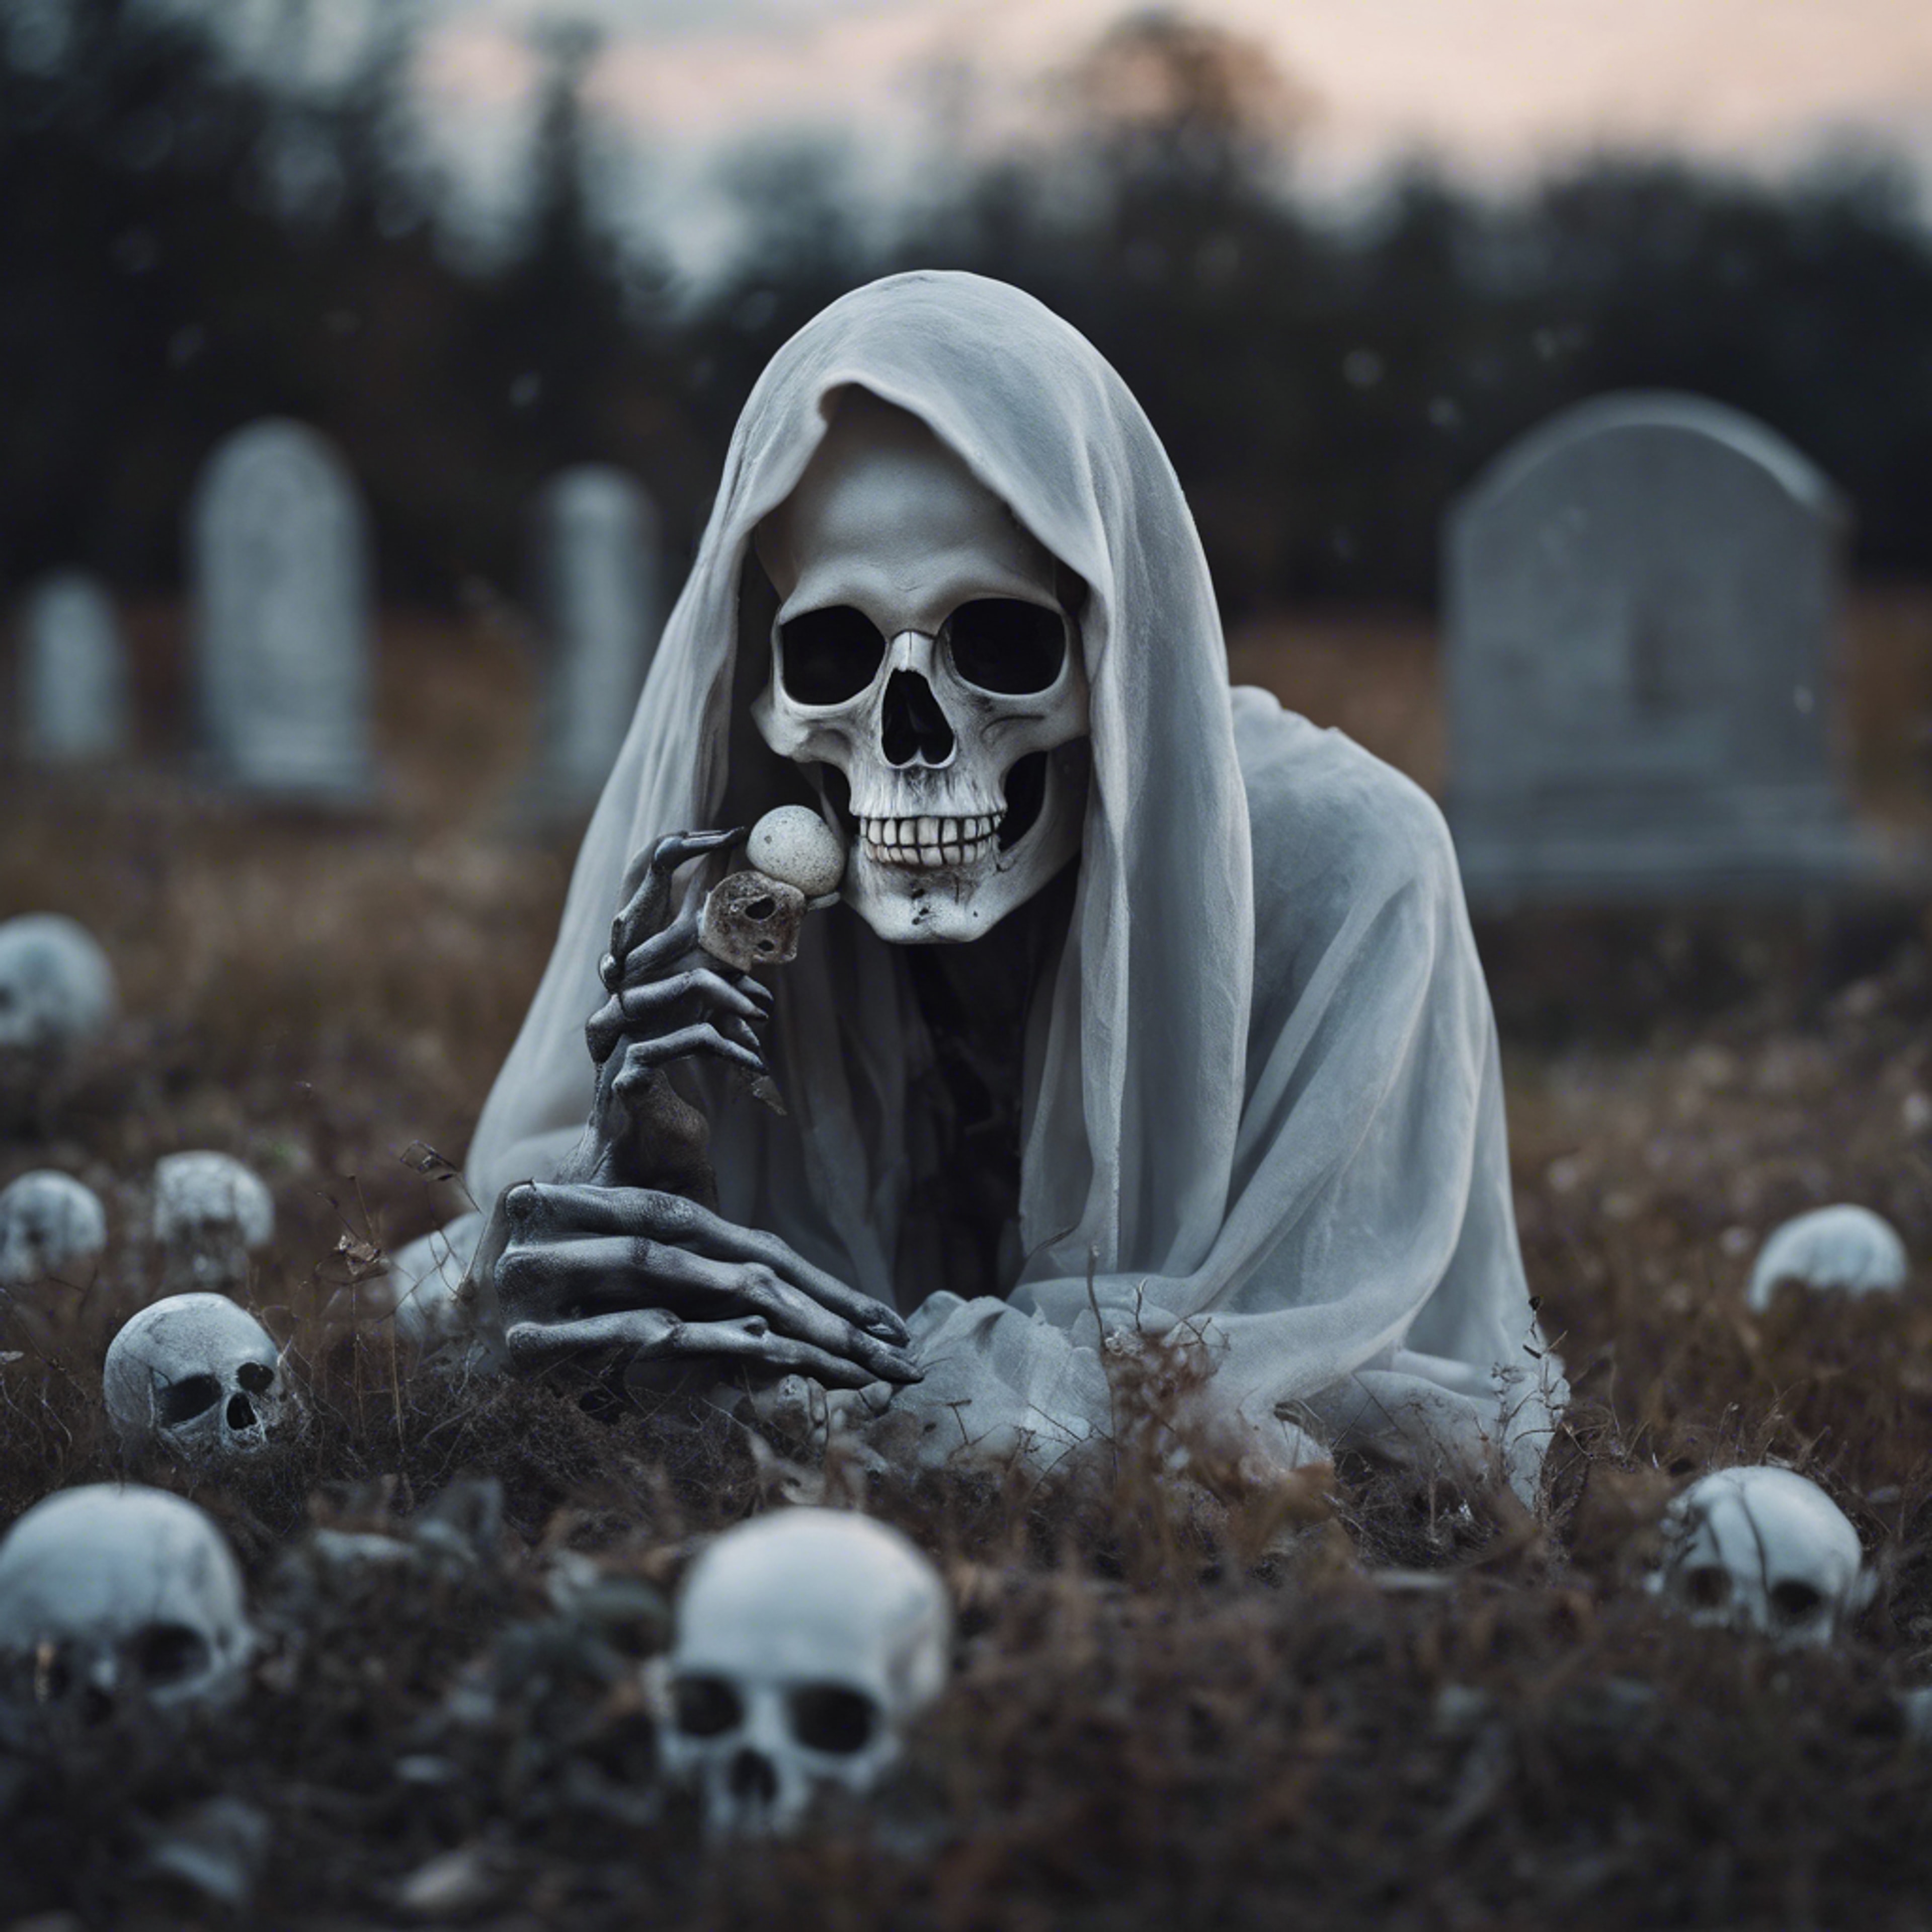 An ethereal ghost holding a gray skull in graveyard under the light of the full moon. Wallpaper[0d793a13818b4b628b9f]